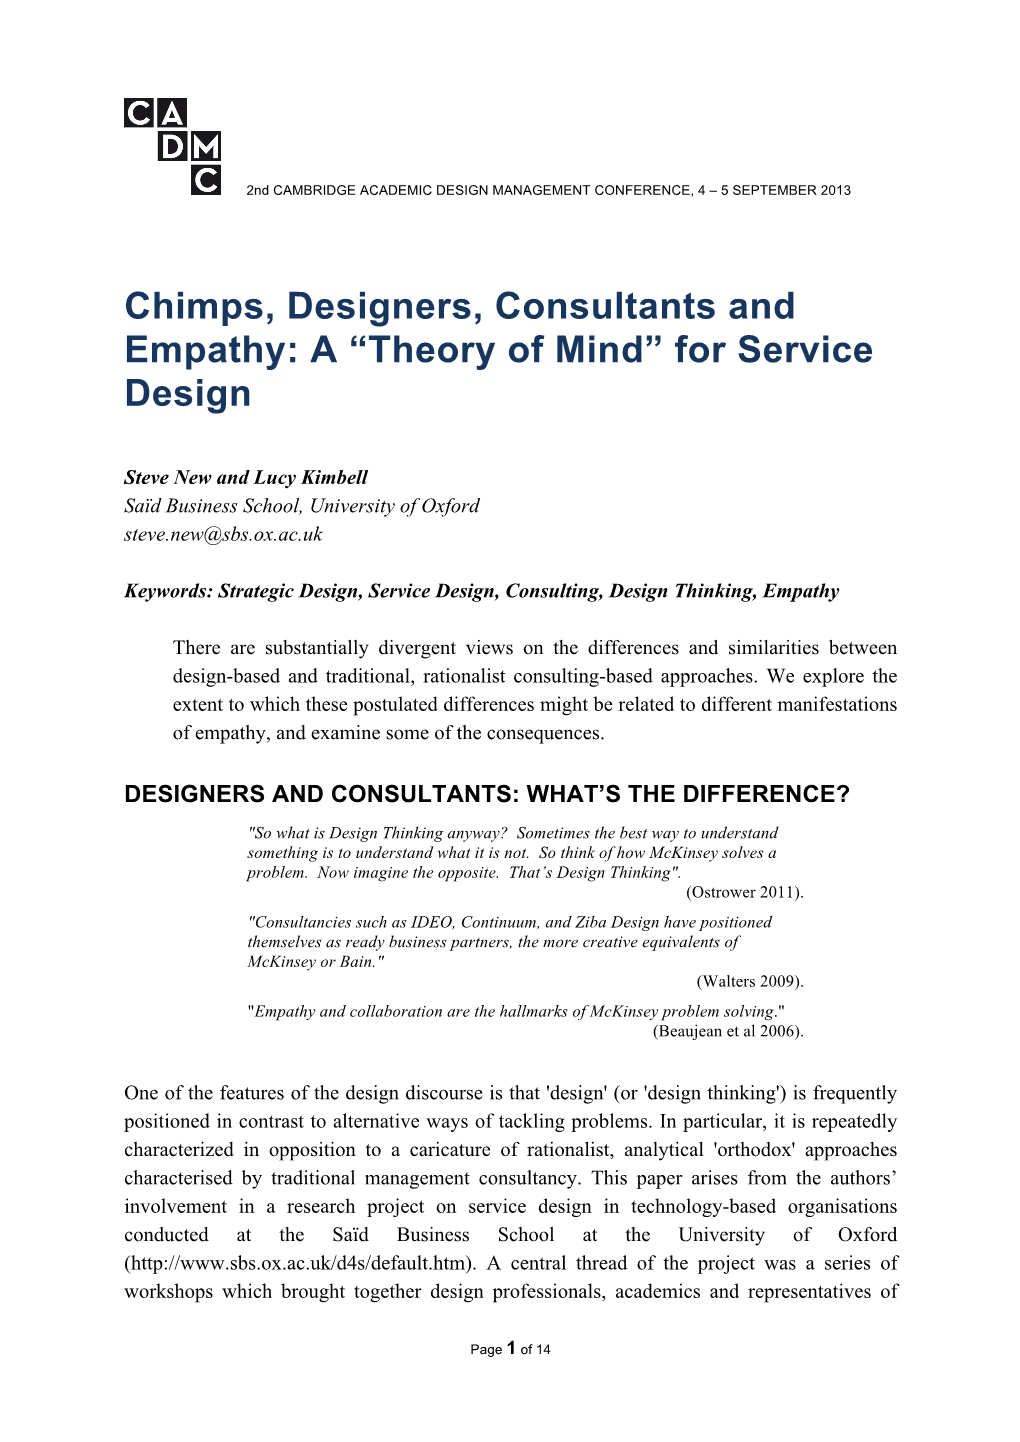 Chimps, Designers, Consultants and Empathy: a “Theory of Mind” for Service Design